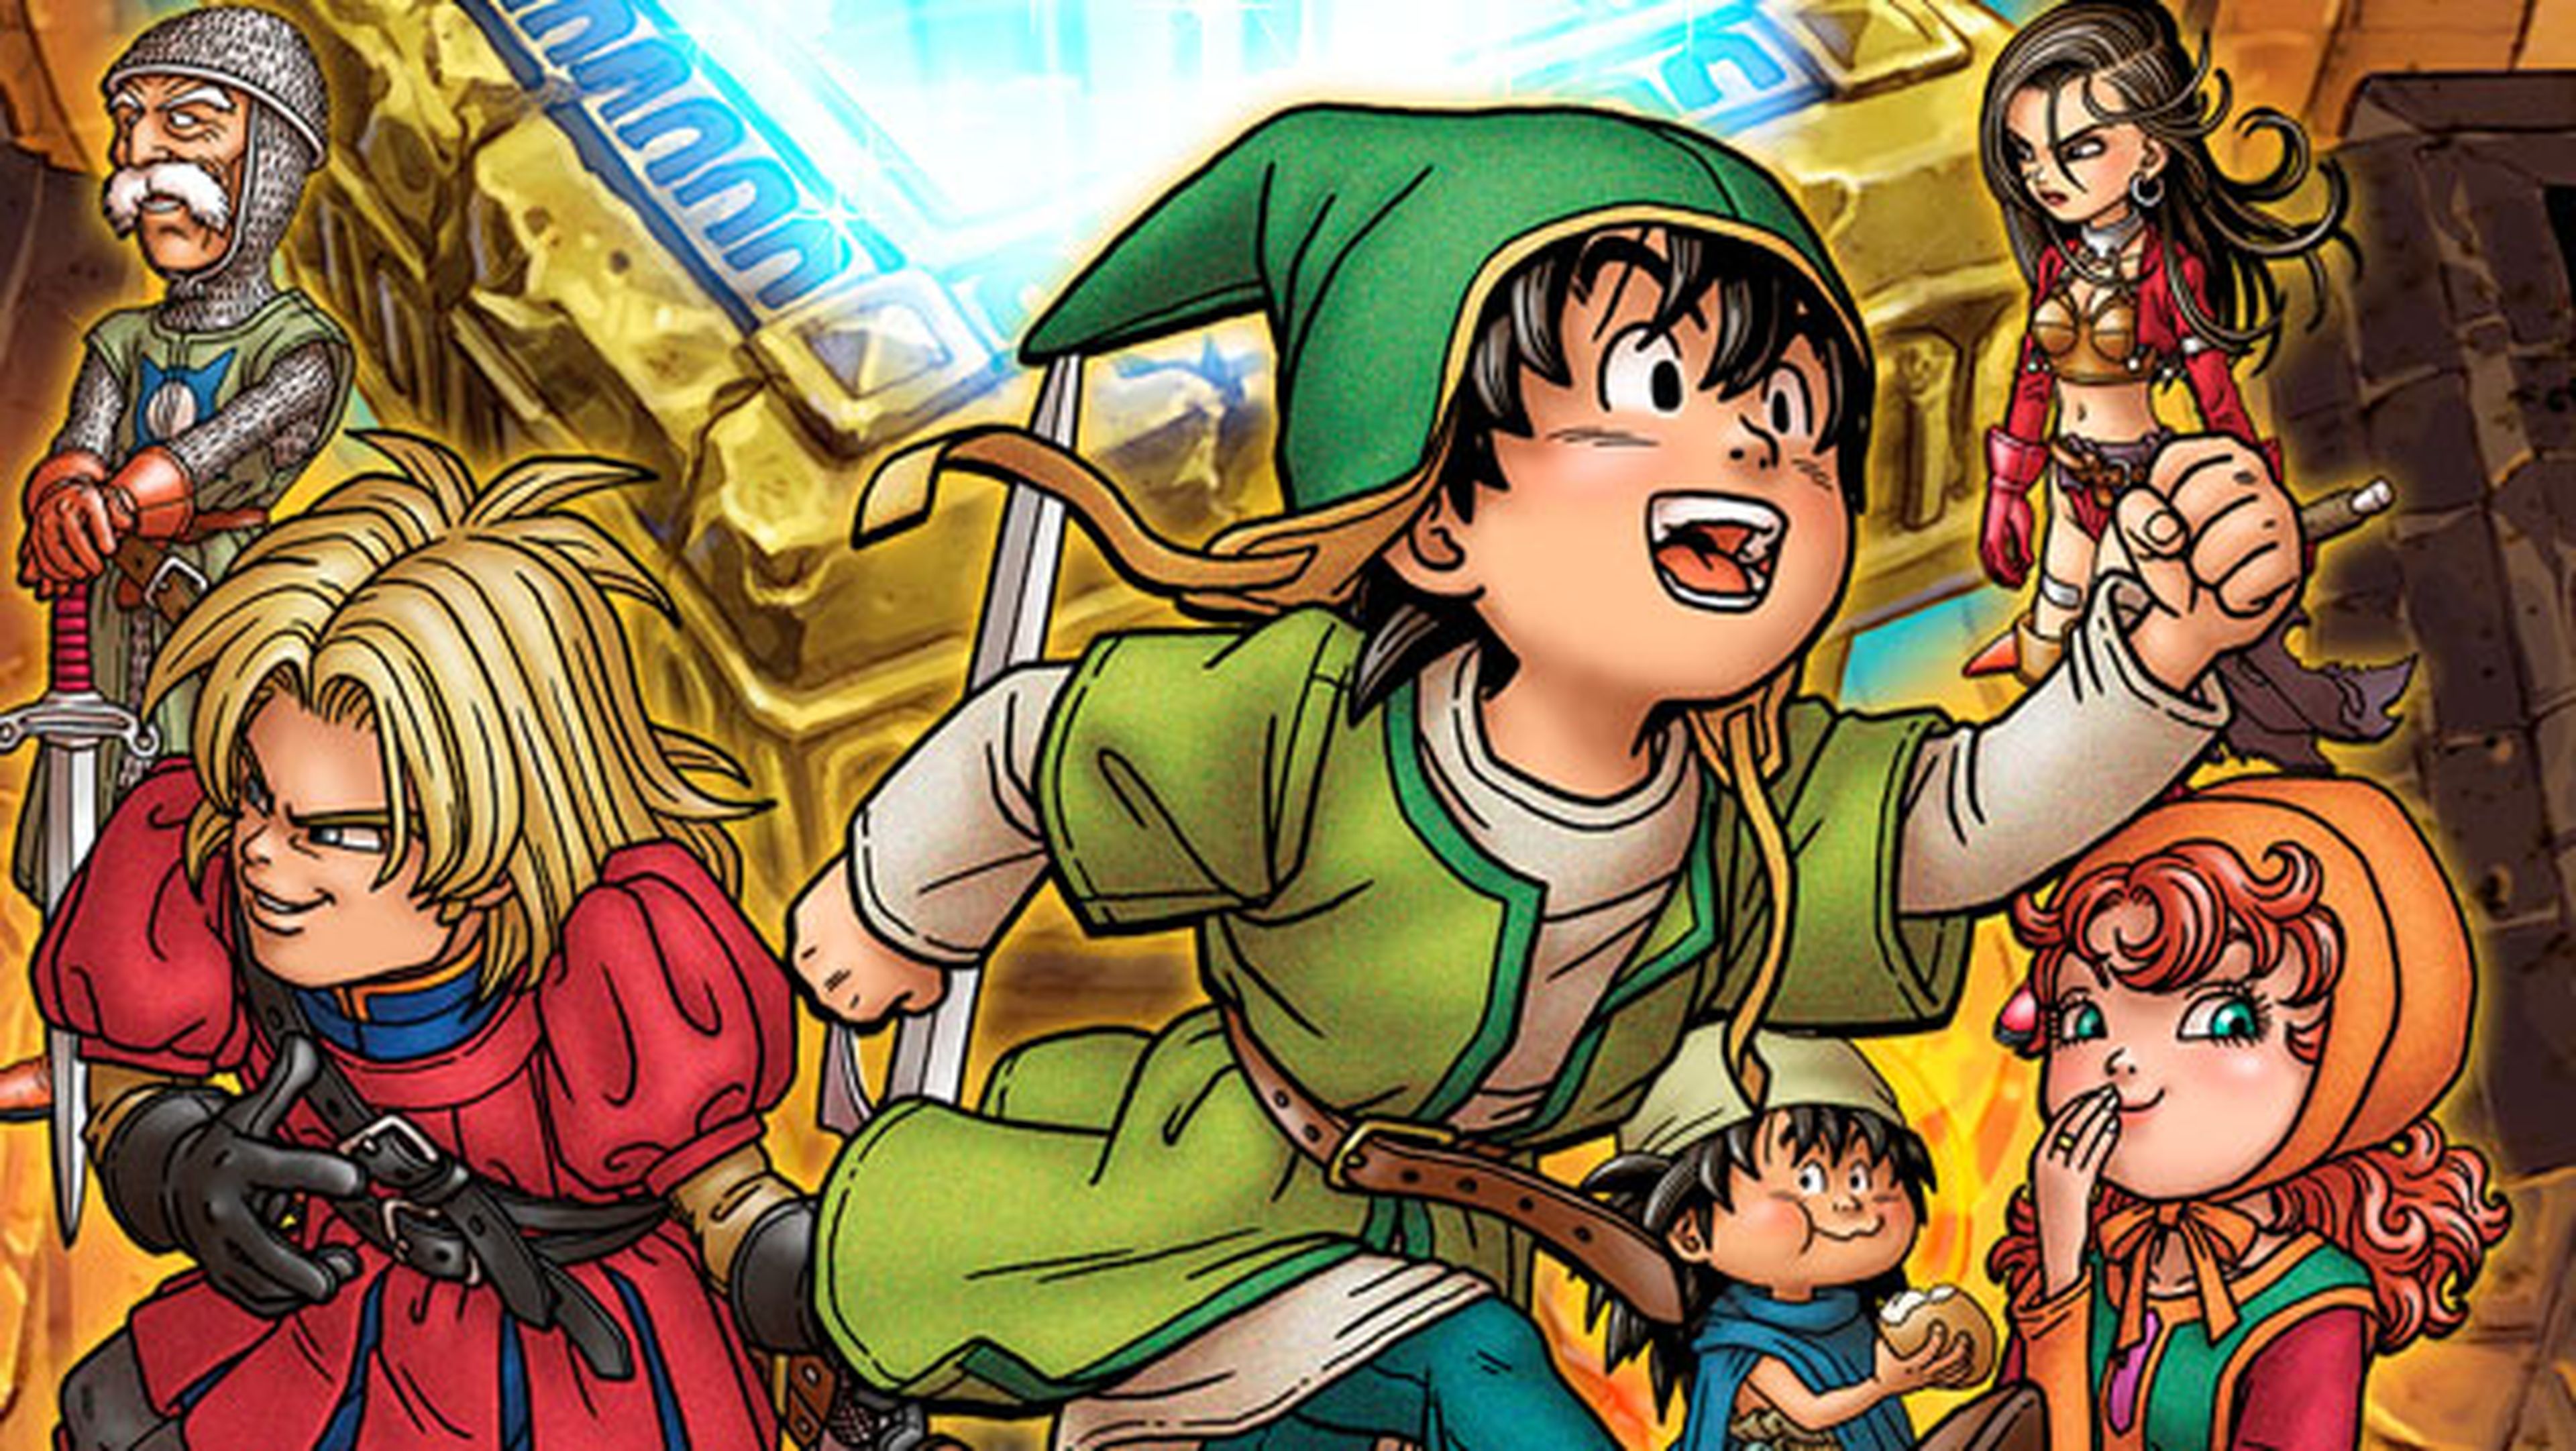 Dragon Quest VII_ Fragments of the Forgotten Past - Combates